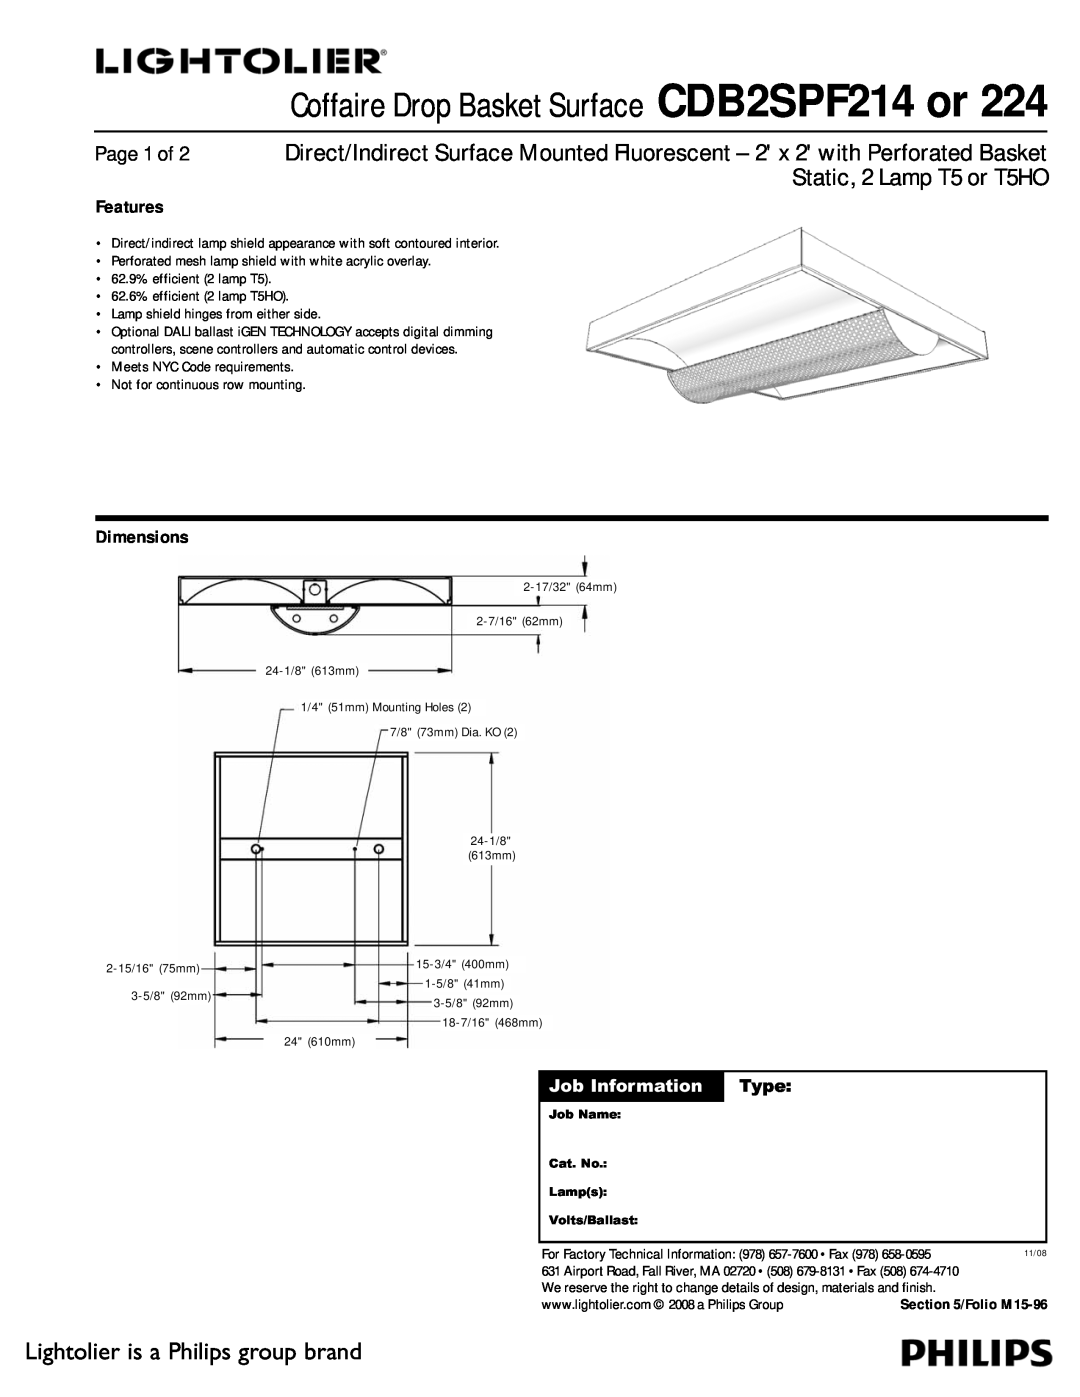 Lightolier CDB2GPF224 dimensions Coffaire Drop Basket Surface CDB2SPF214 or, Static, 2 Lamp T5 or T5HO, Page 1 of, Type 